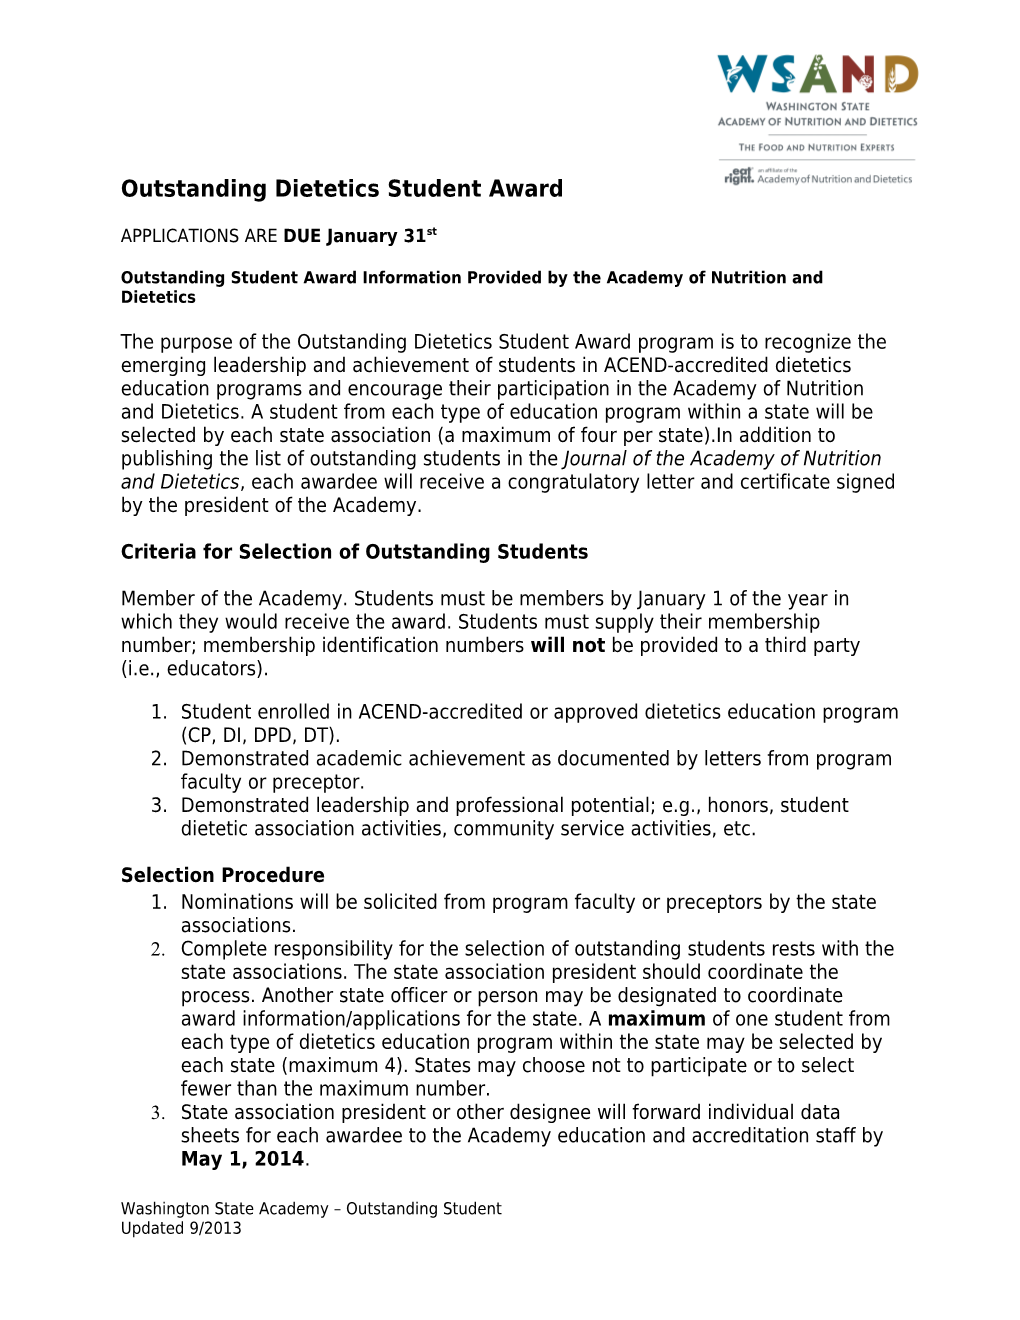 Outstanding Student Award Information Provided by the Academy of Nutrition and Dietetics